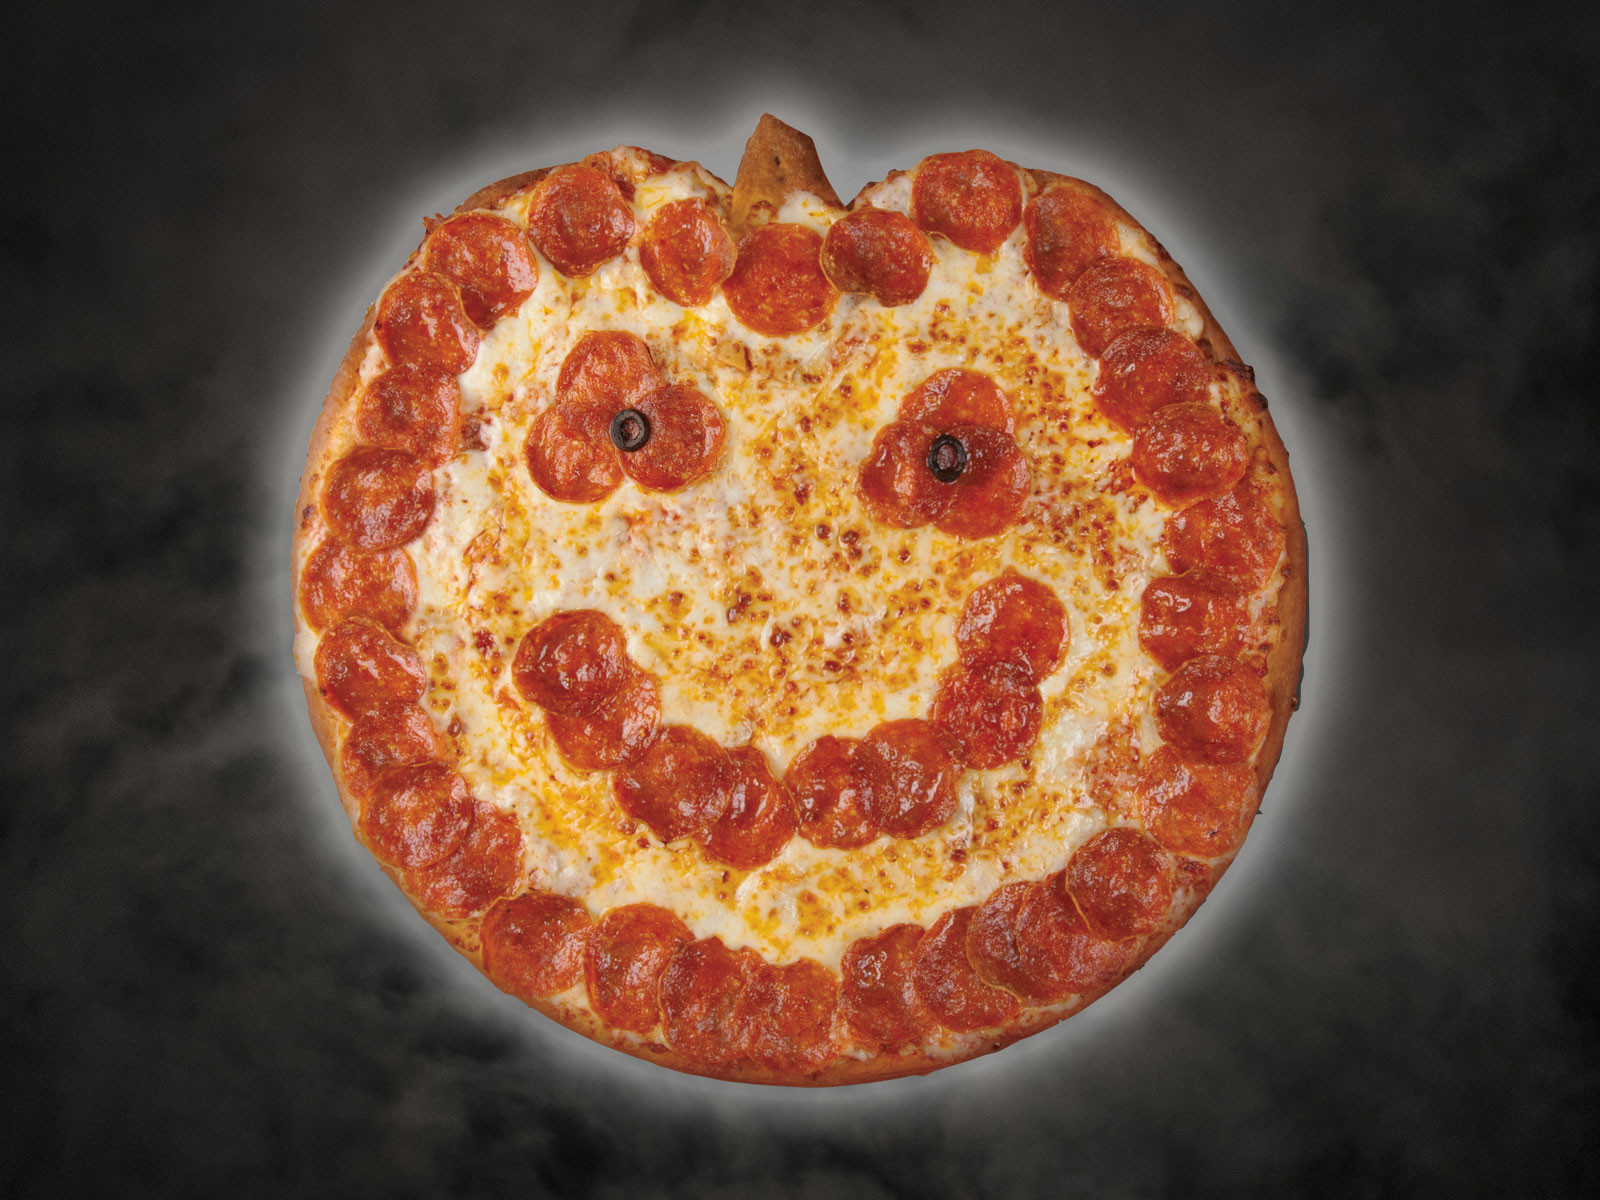 Halloween Food Deals
 Halloween Deals Freebies and Special fers to Treat